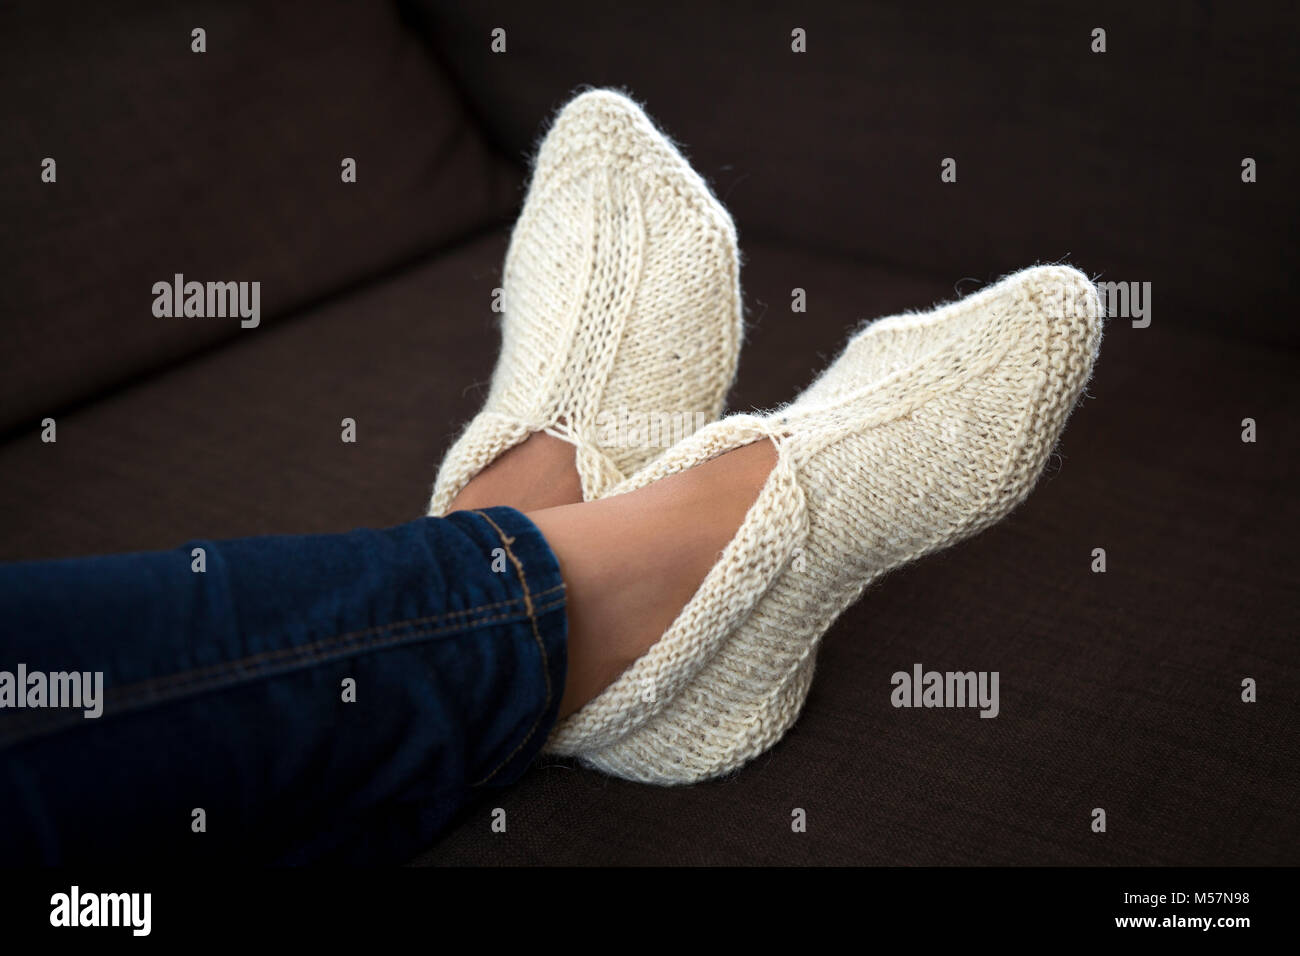 A typical production of the Balkans's handicrafts: woollen slippers knitted by hand. Artisanat des Balkans: chaussons en laine tricotés main. Stock Photo